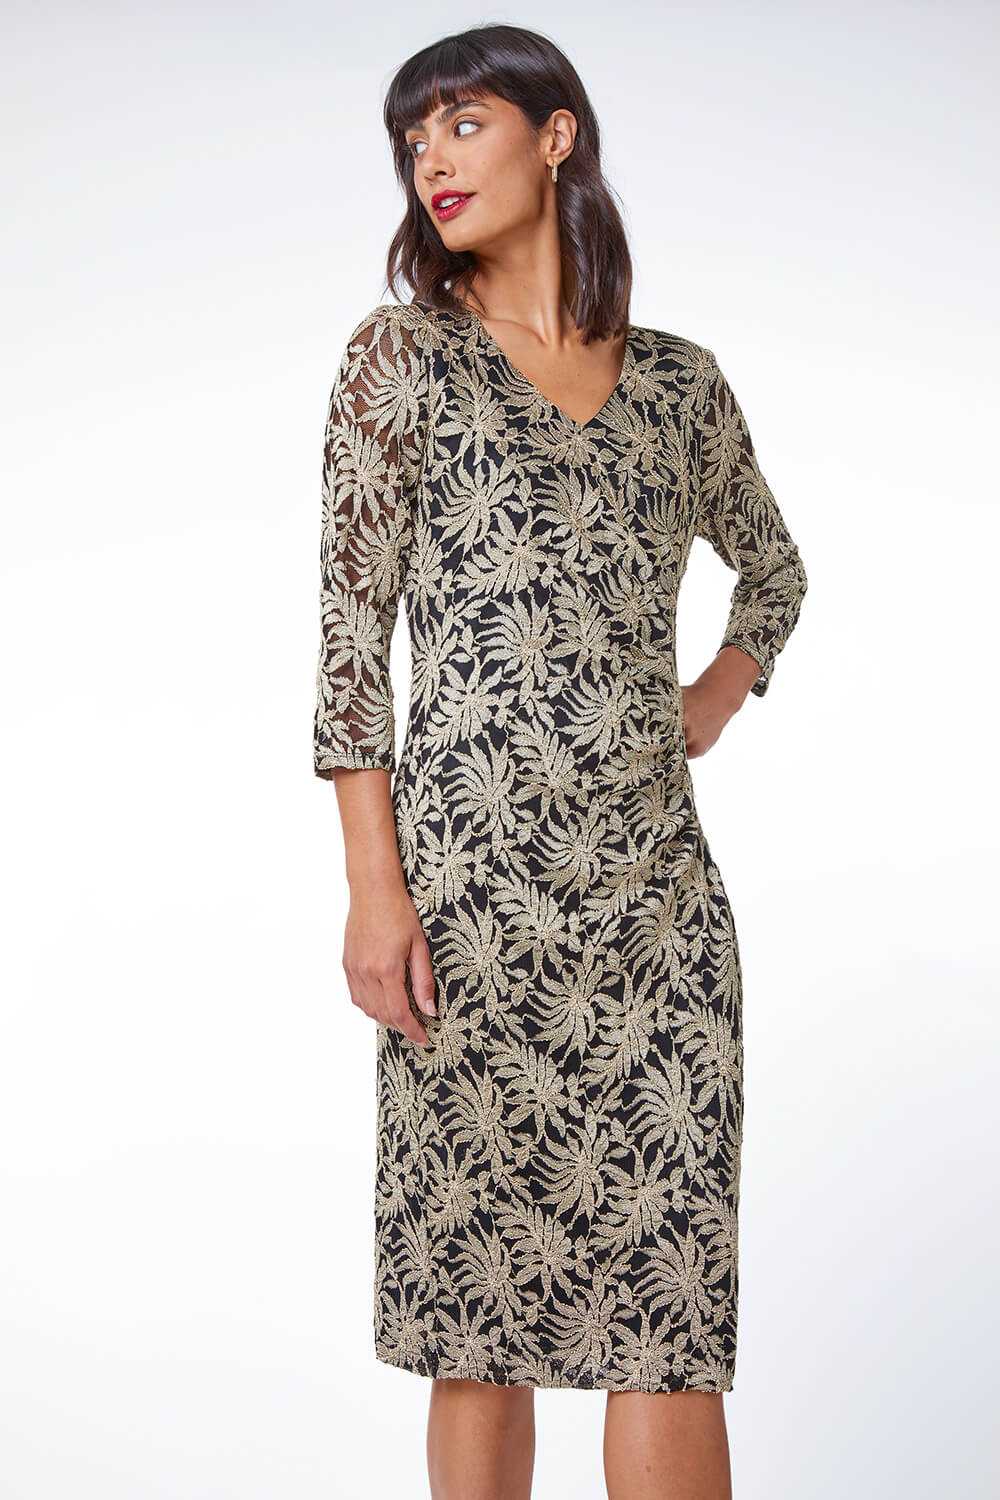 Palm Print Ruched Lace Dress in Gold - Roman Originals UK